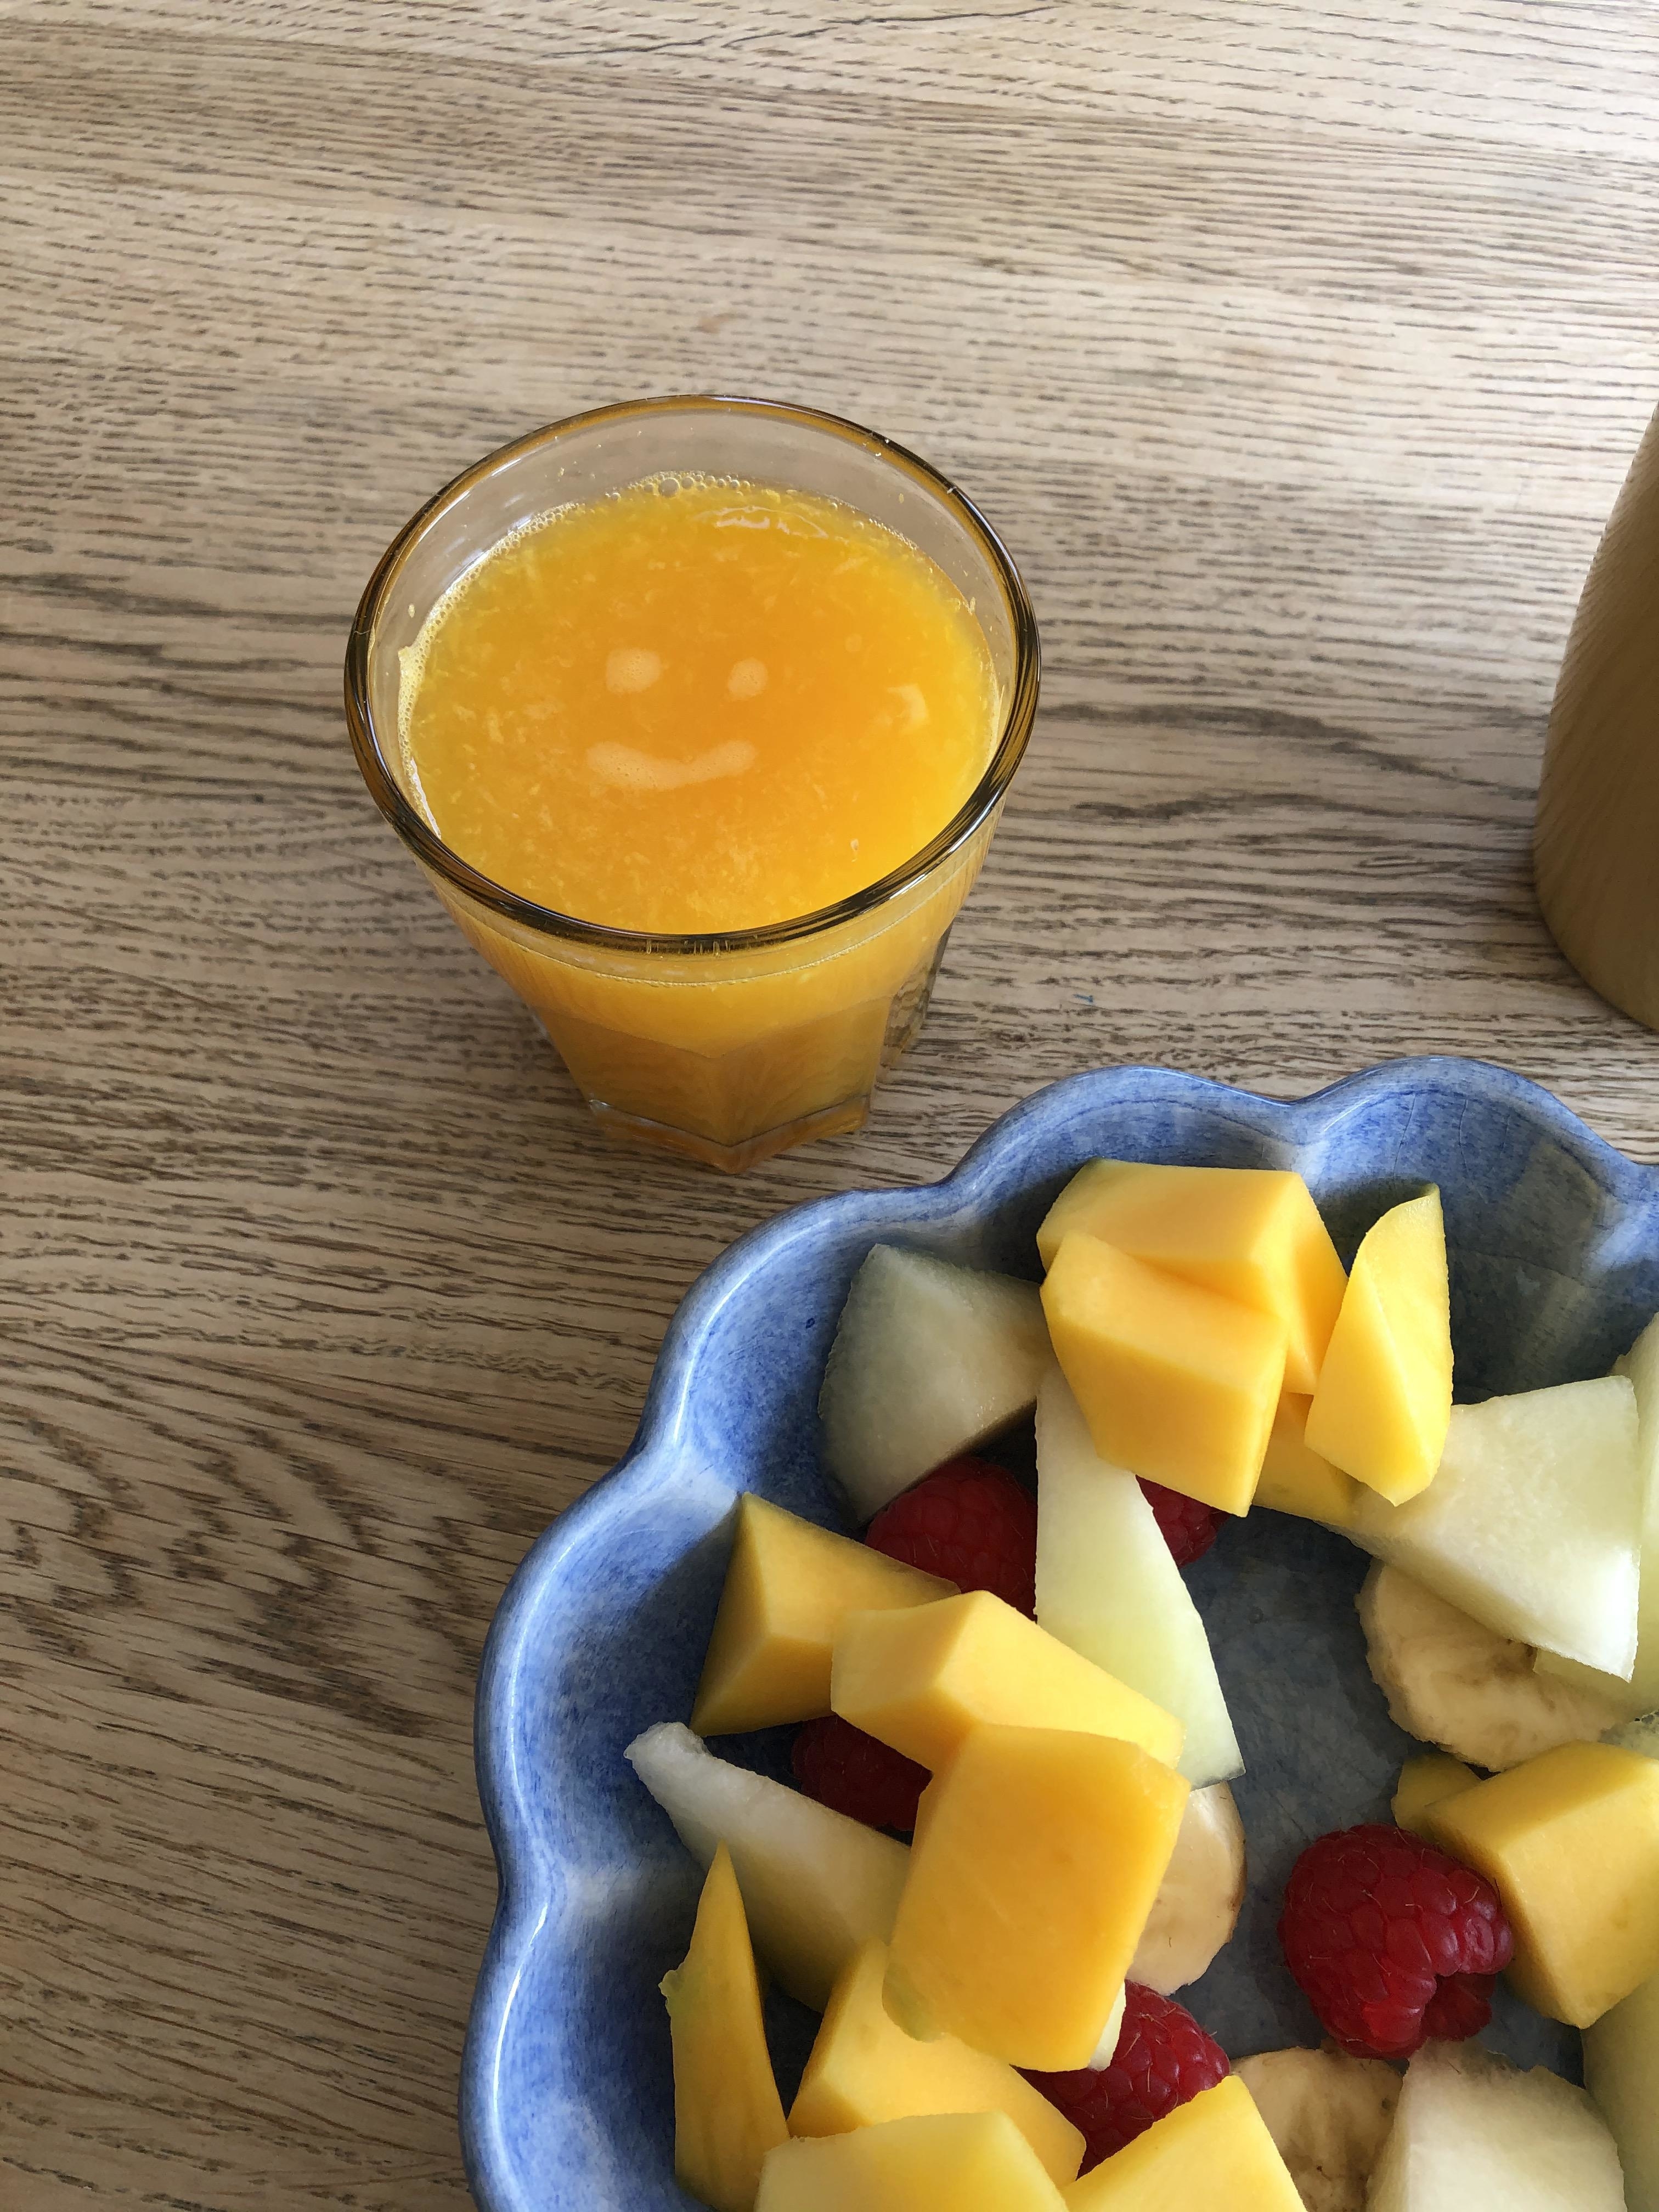 Glass of orange juice next to a plate of mixed fruit including mango, apple, and raspberries